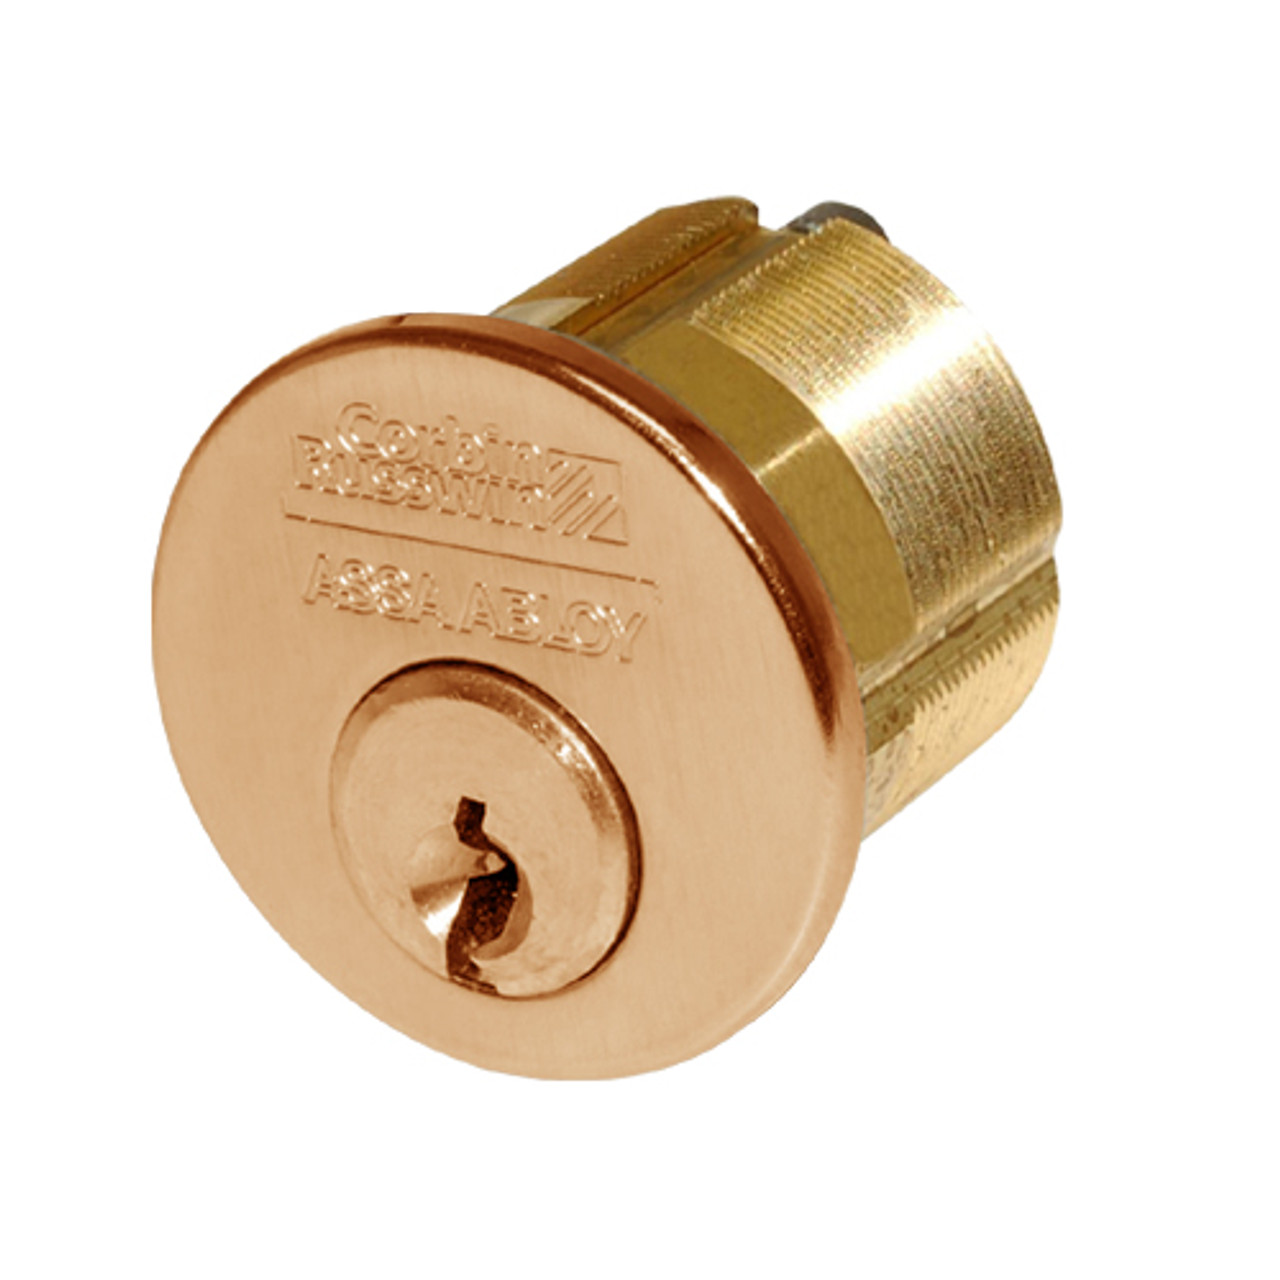 CR1000-118-A06-6-N2-612 Corbin Conventional Mortise Cylinder for Mortise Lock and DL3000 Deadlocks with Schlage L9000 Cam in Satin Bronze Finish